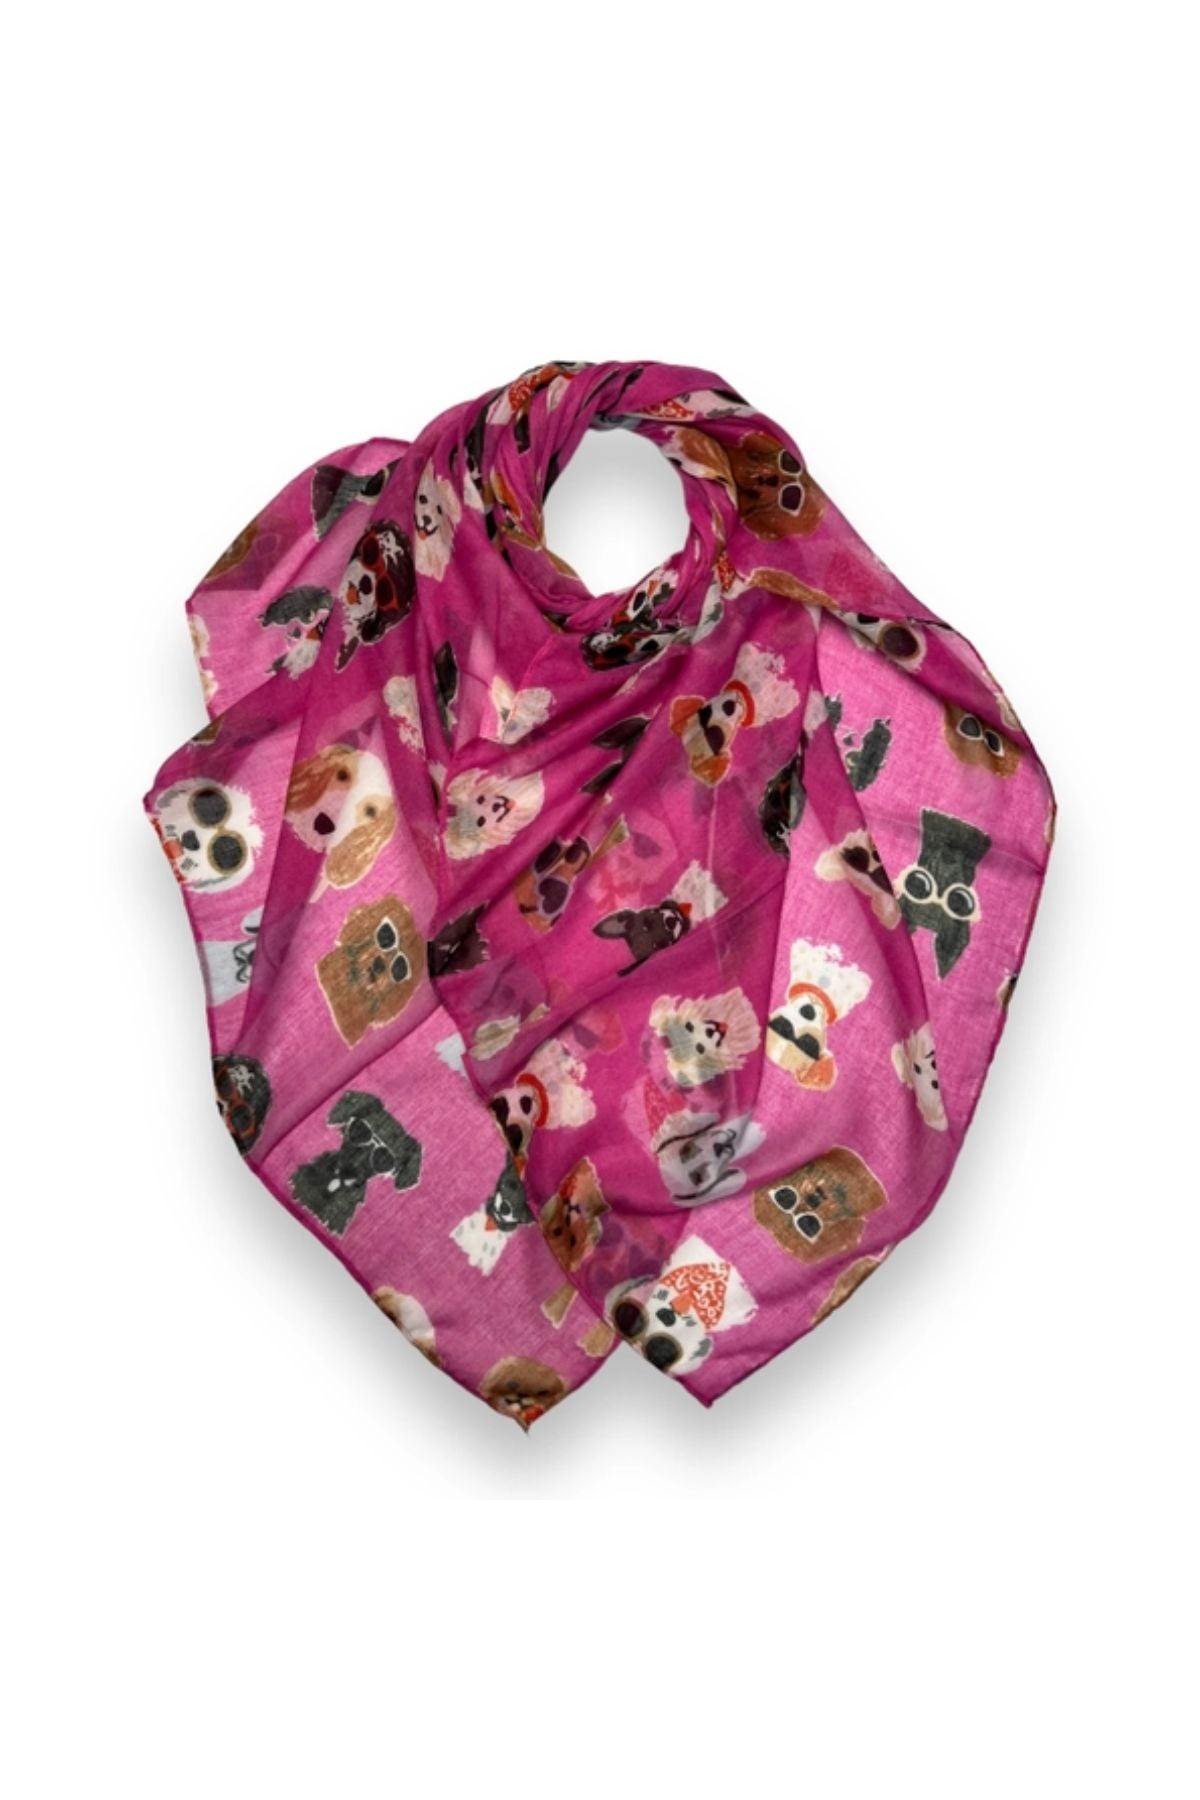 Hot pink dog with sunglasses scarf